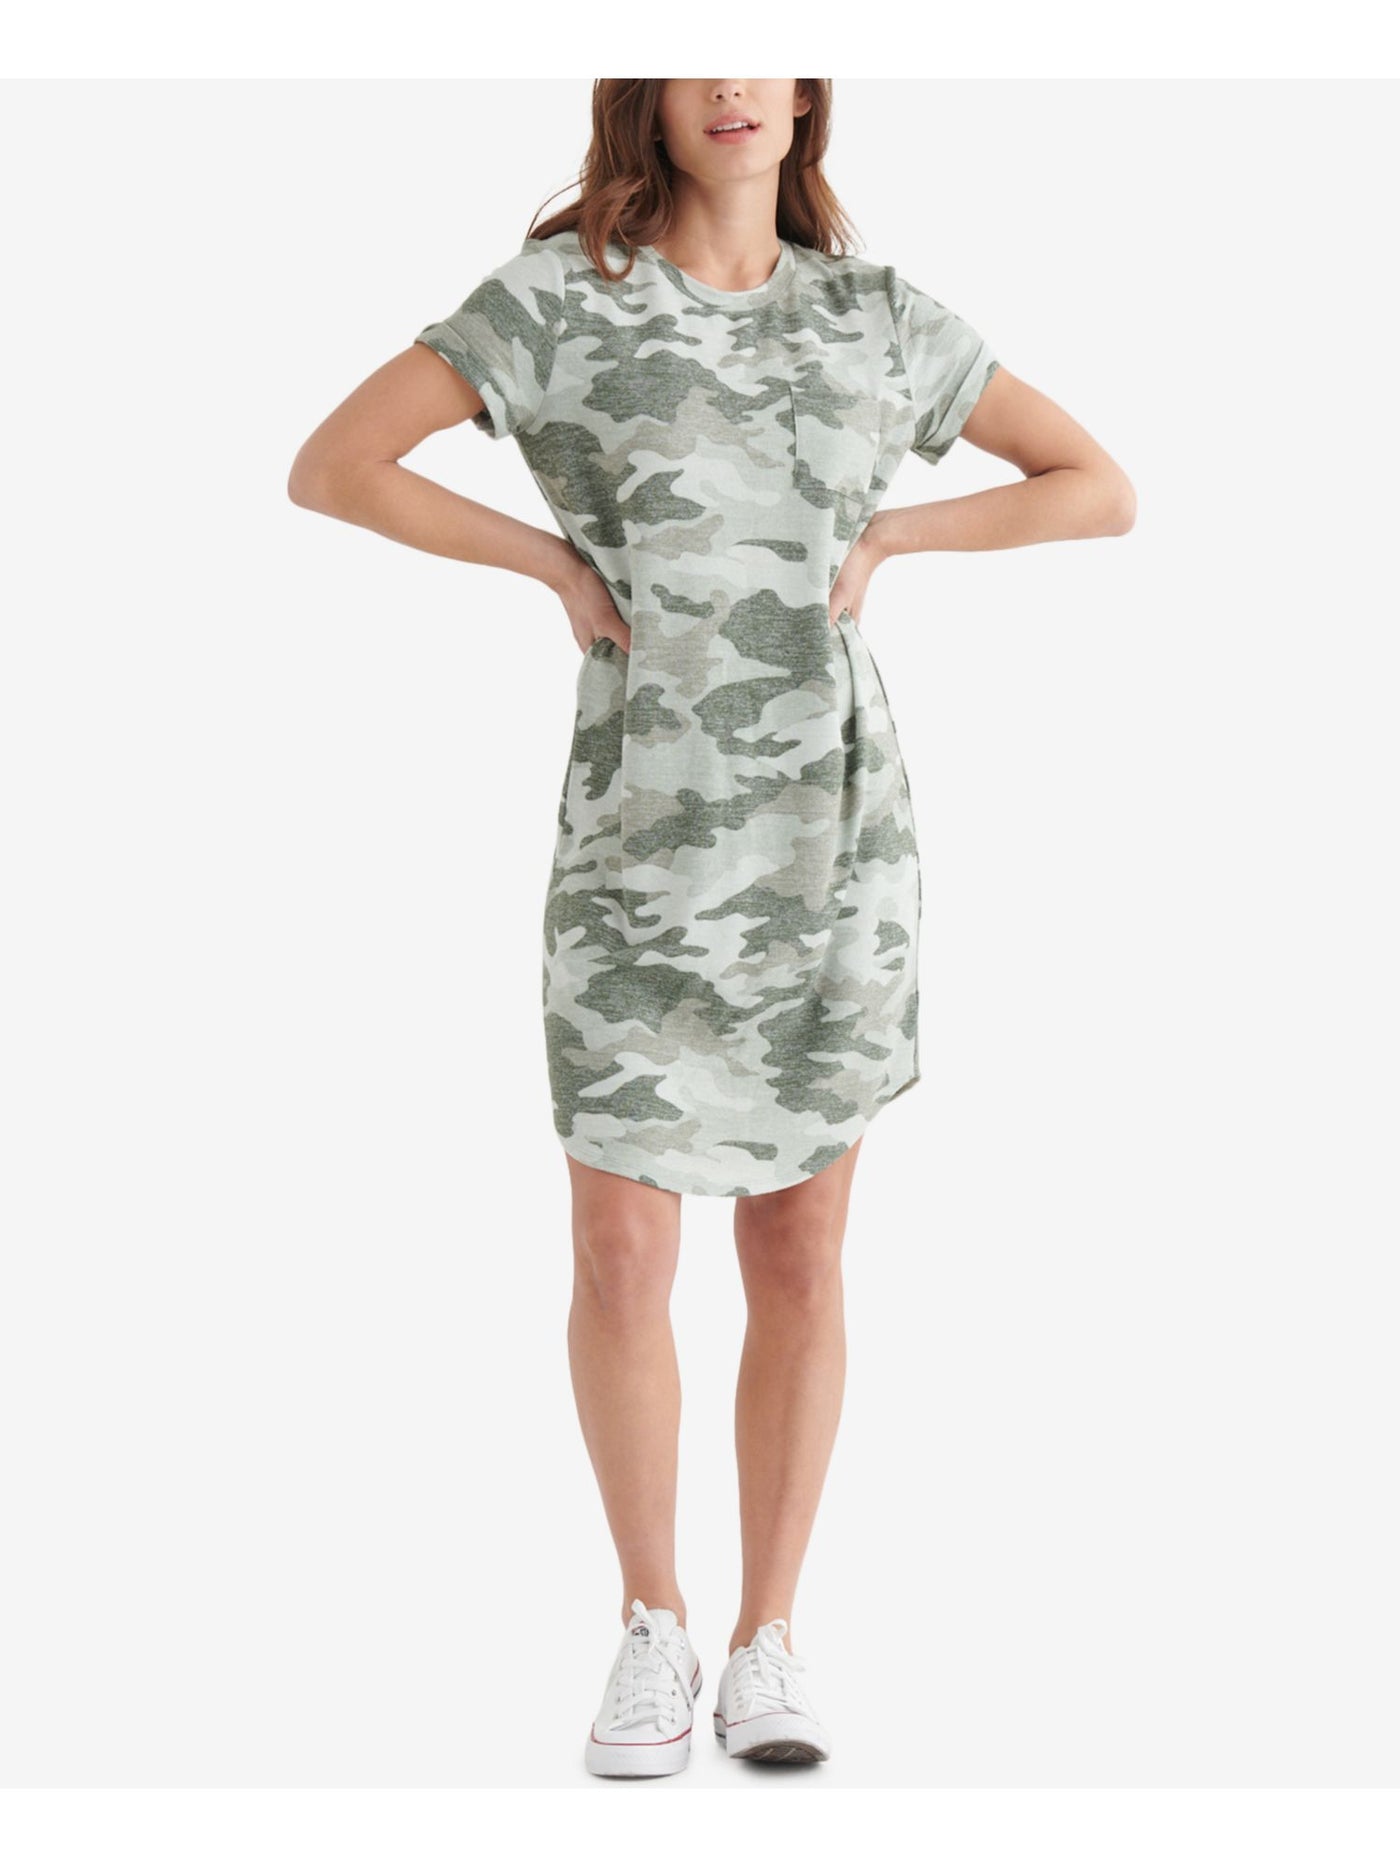 LUCKY BRAND Womens Gray Camouflage Short Sleeve Crew Neck Above The Knee T-Shirt Dress S